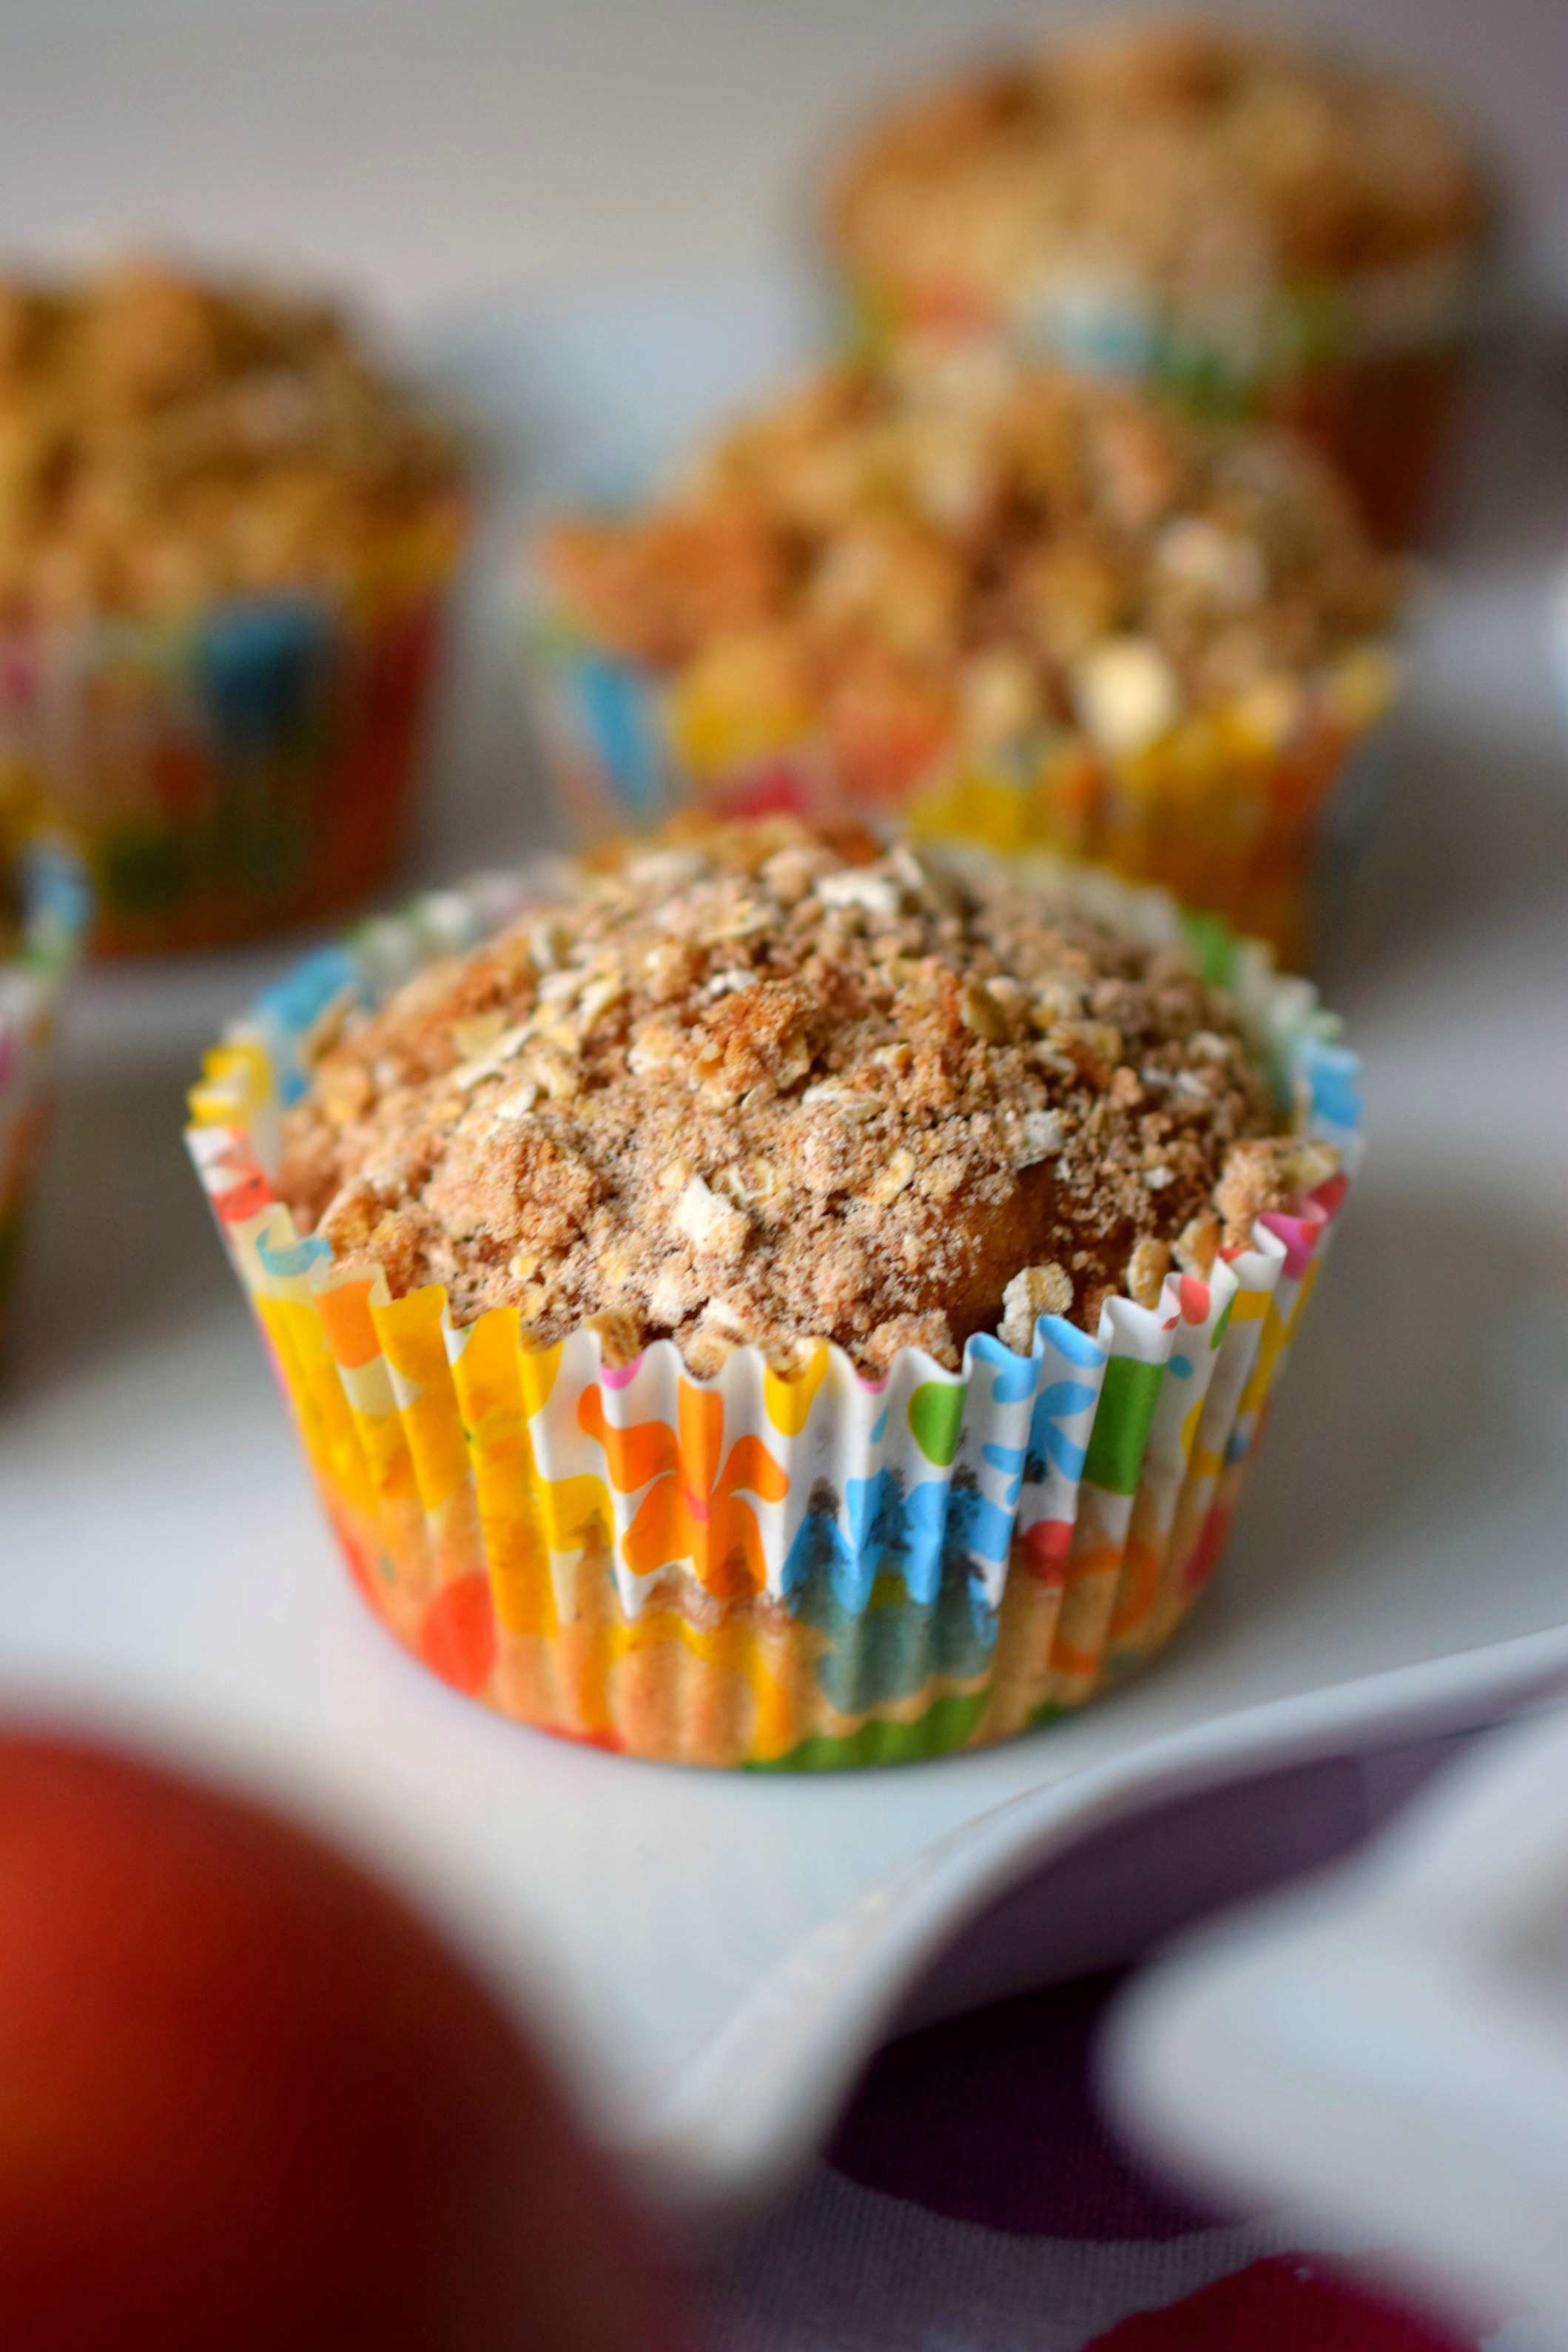 Applesauce Muffins with Streusel Topping - Who Needs A Cape?